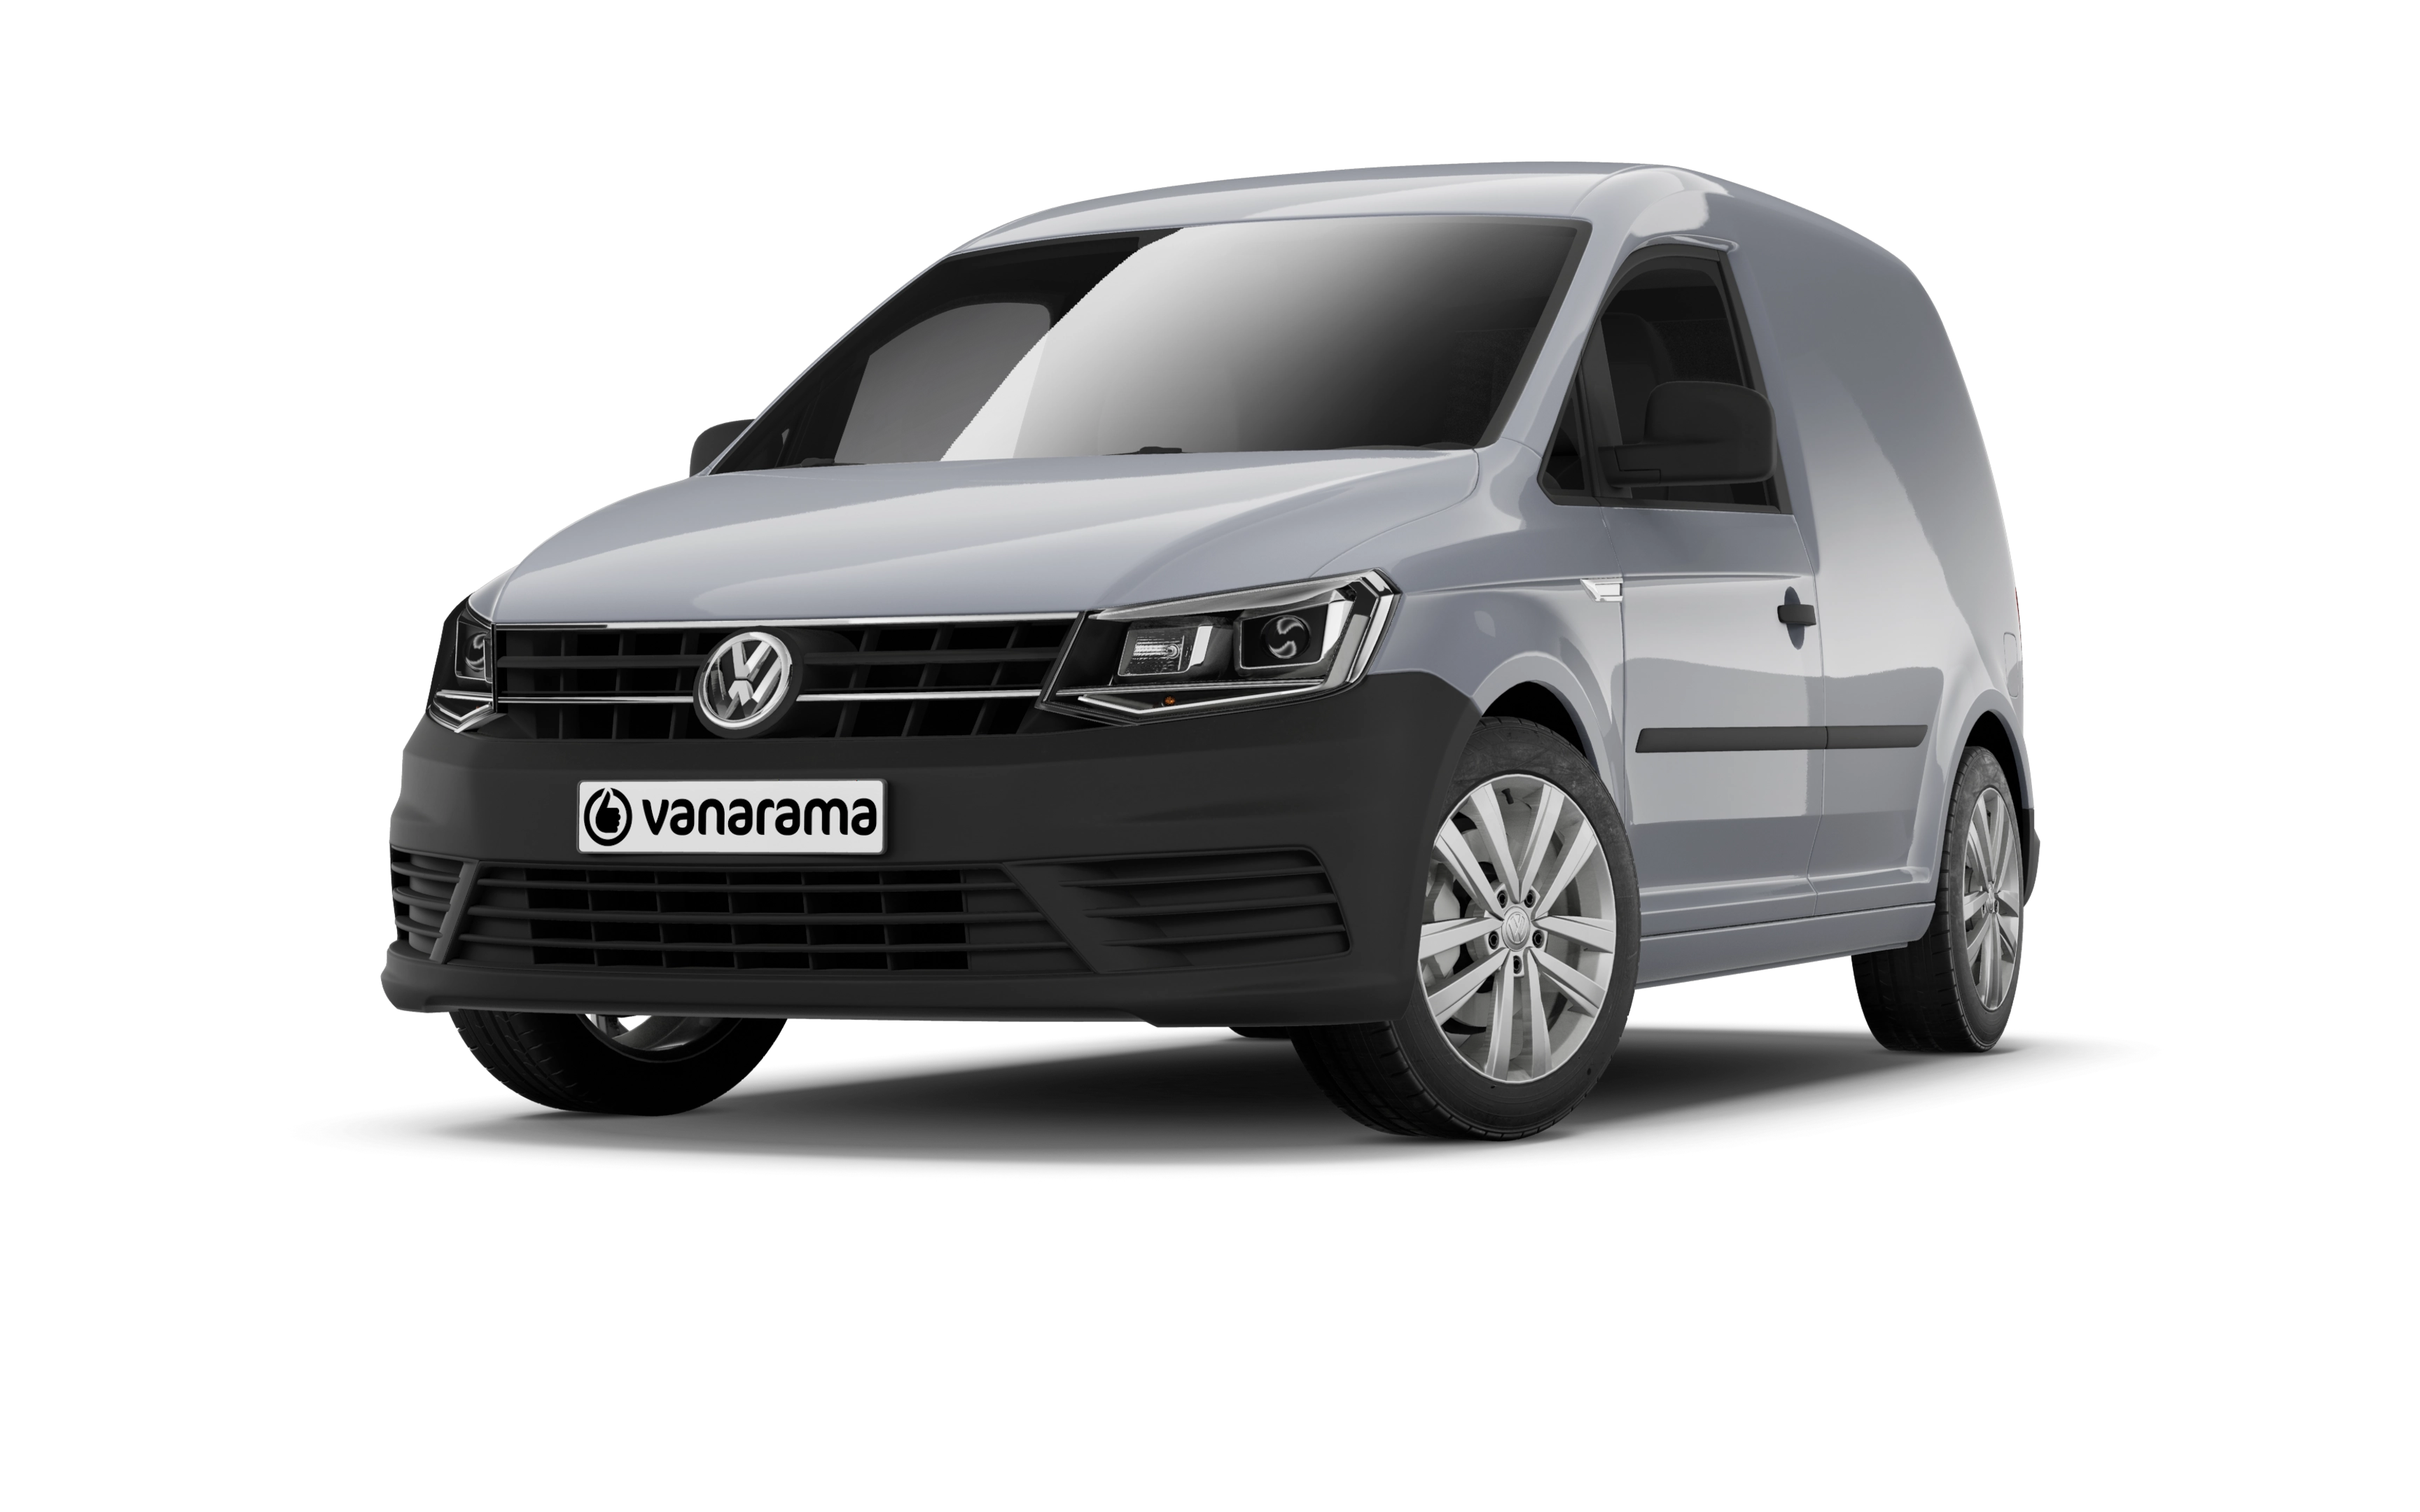 Top 5 Things We Love About The Volkswagen Caddy